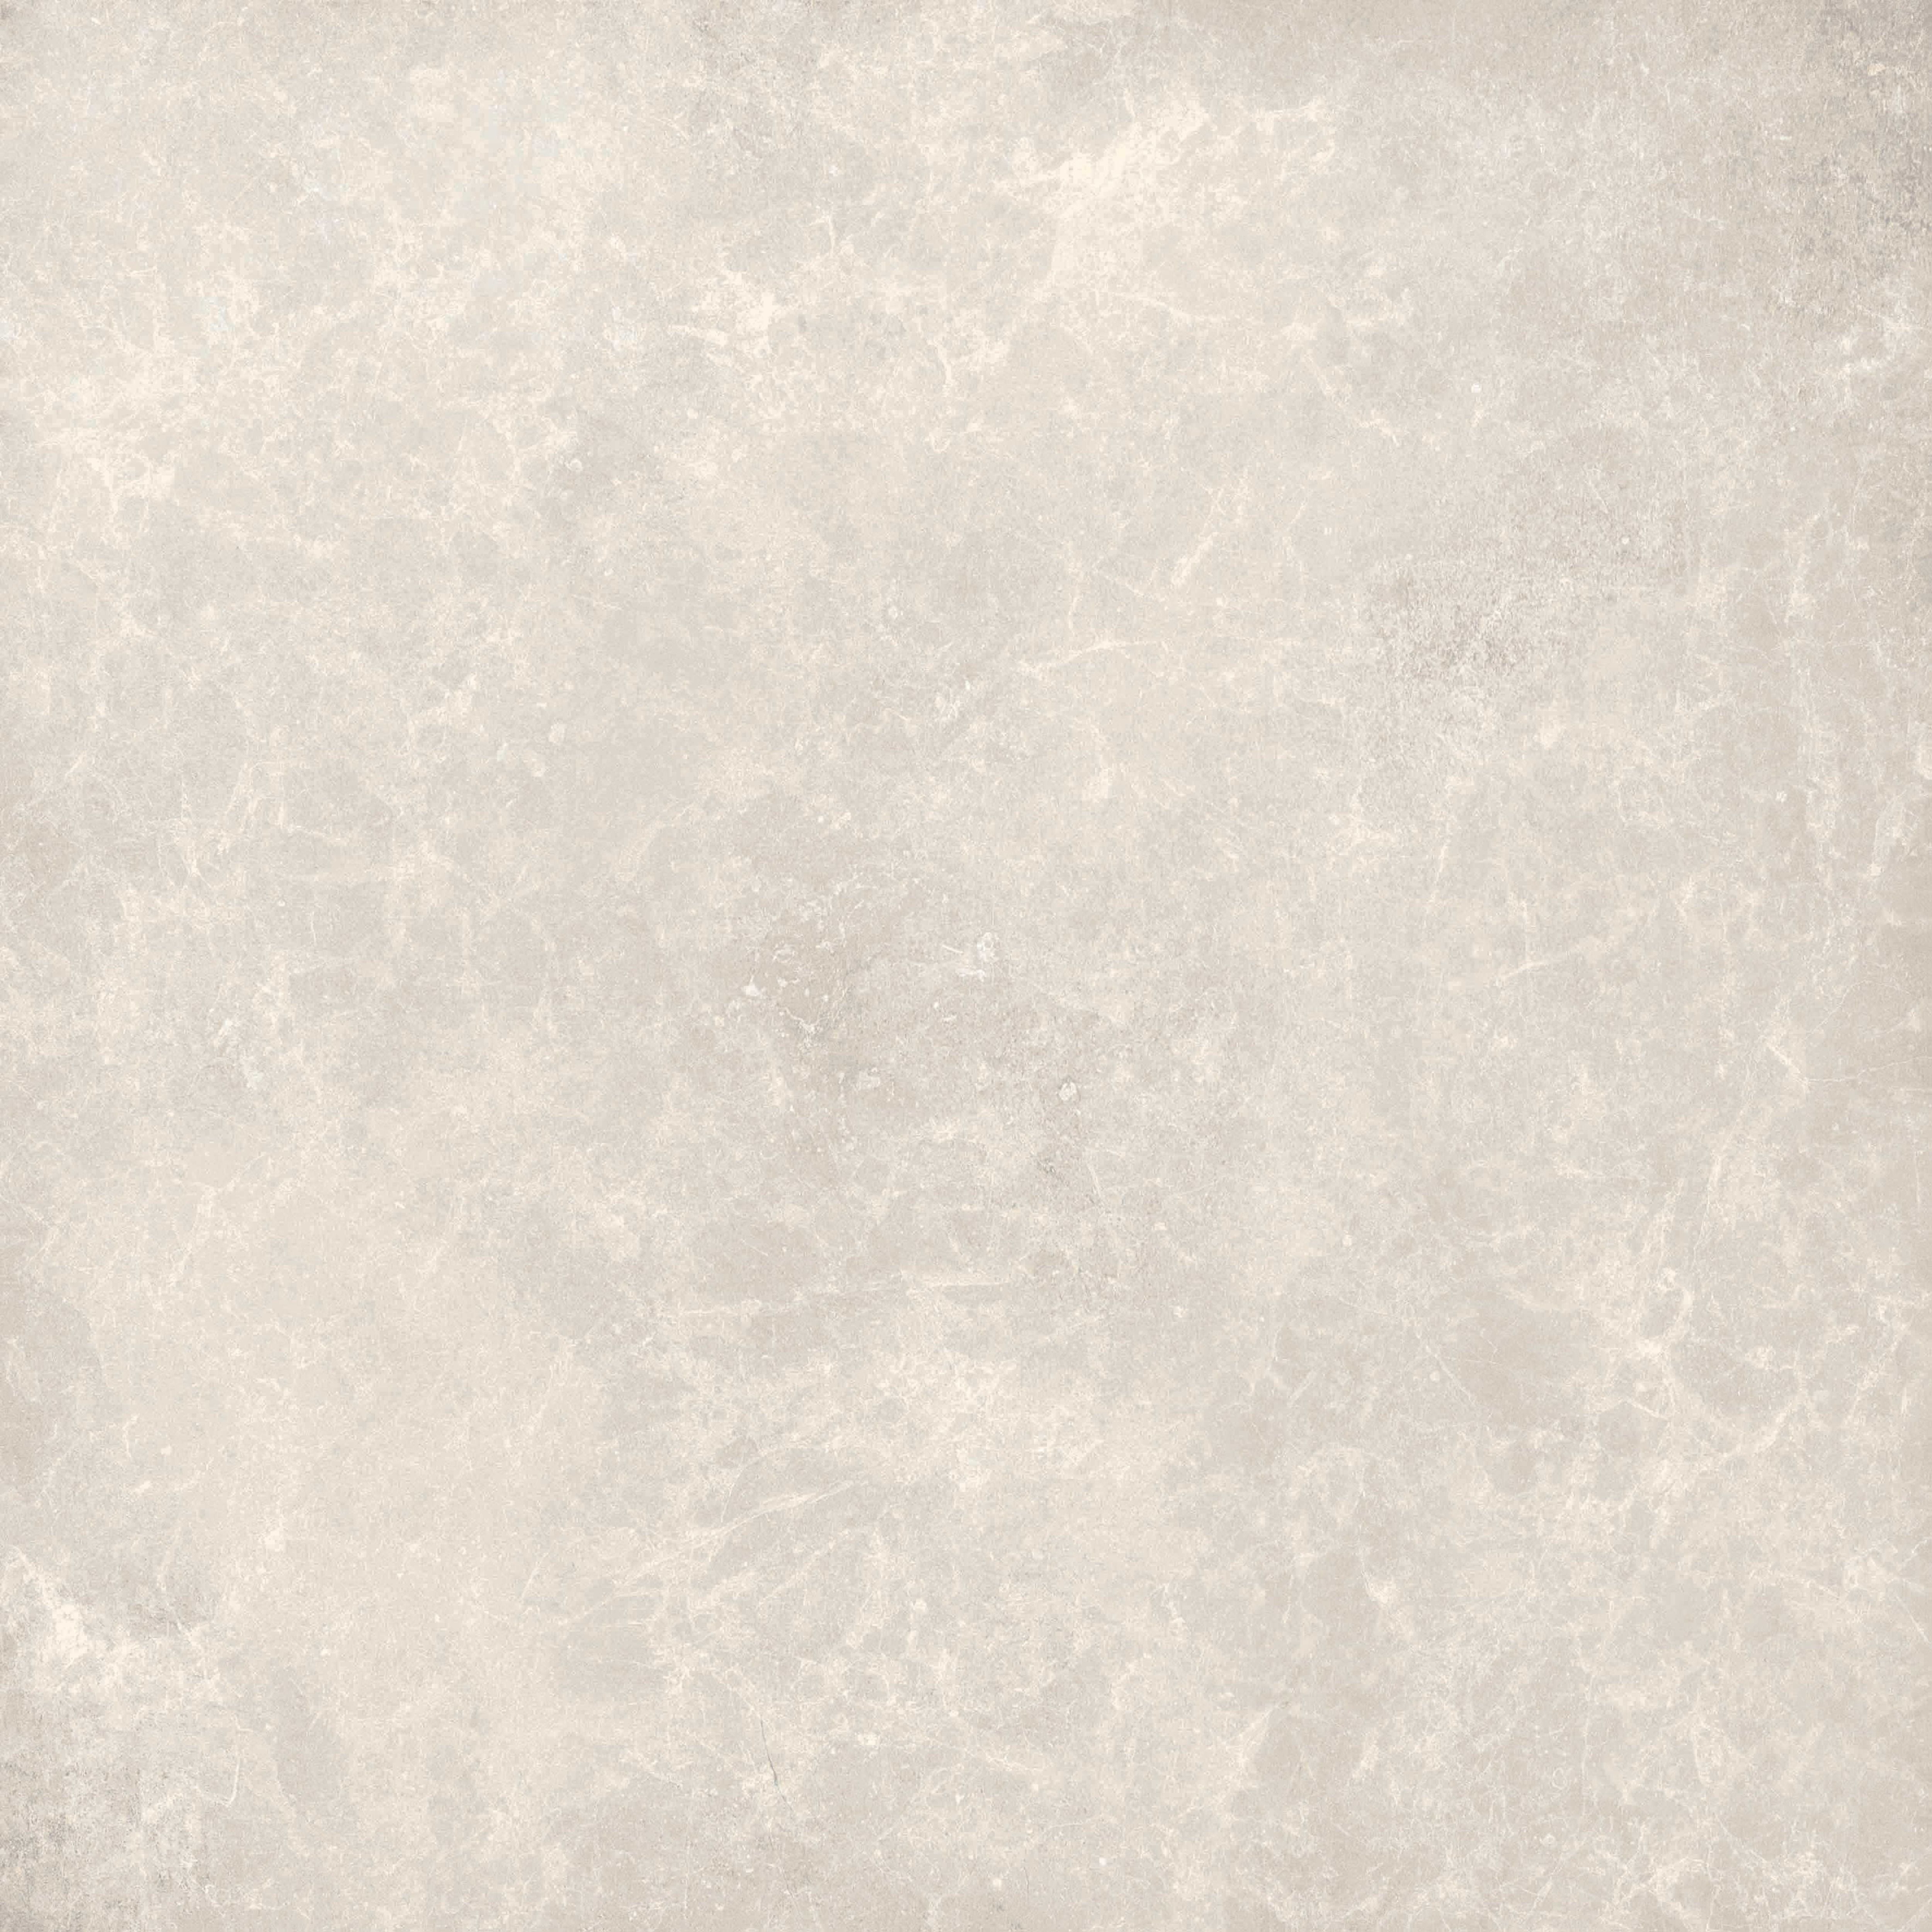 Kale Moonstone White Semi-gloss Stone effect Textured Porcelain Indoor Wall & floor tile, Pack of 3, (L)600mm (W)600mm